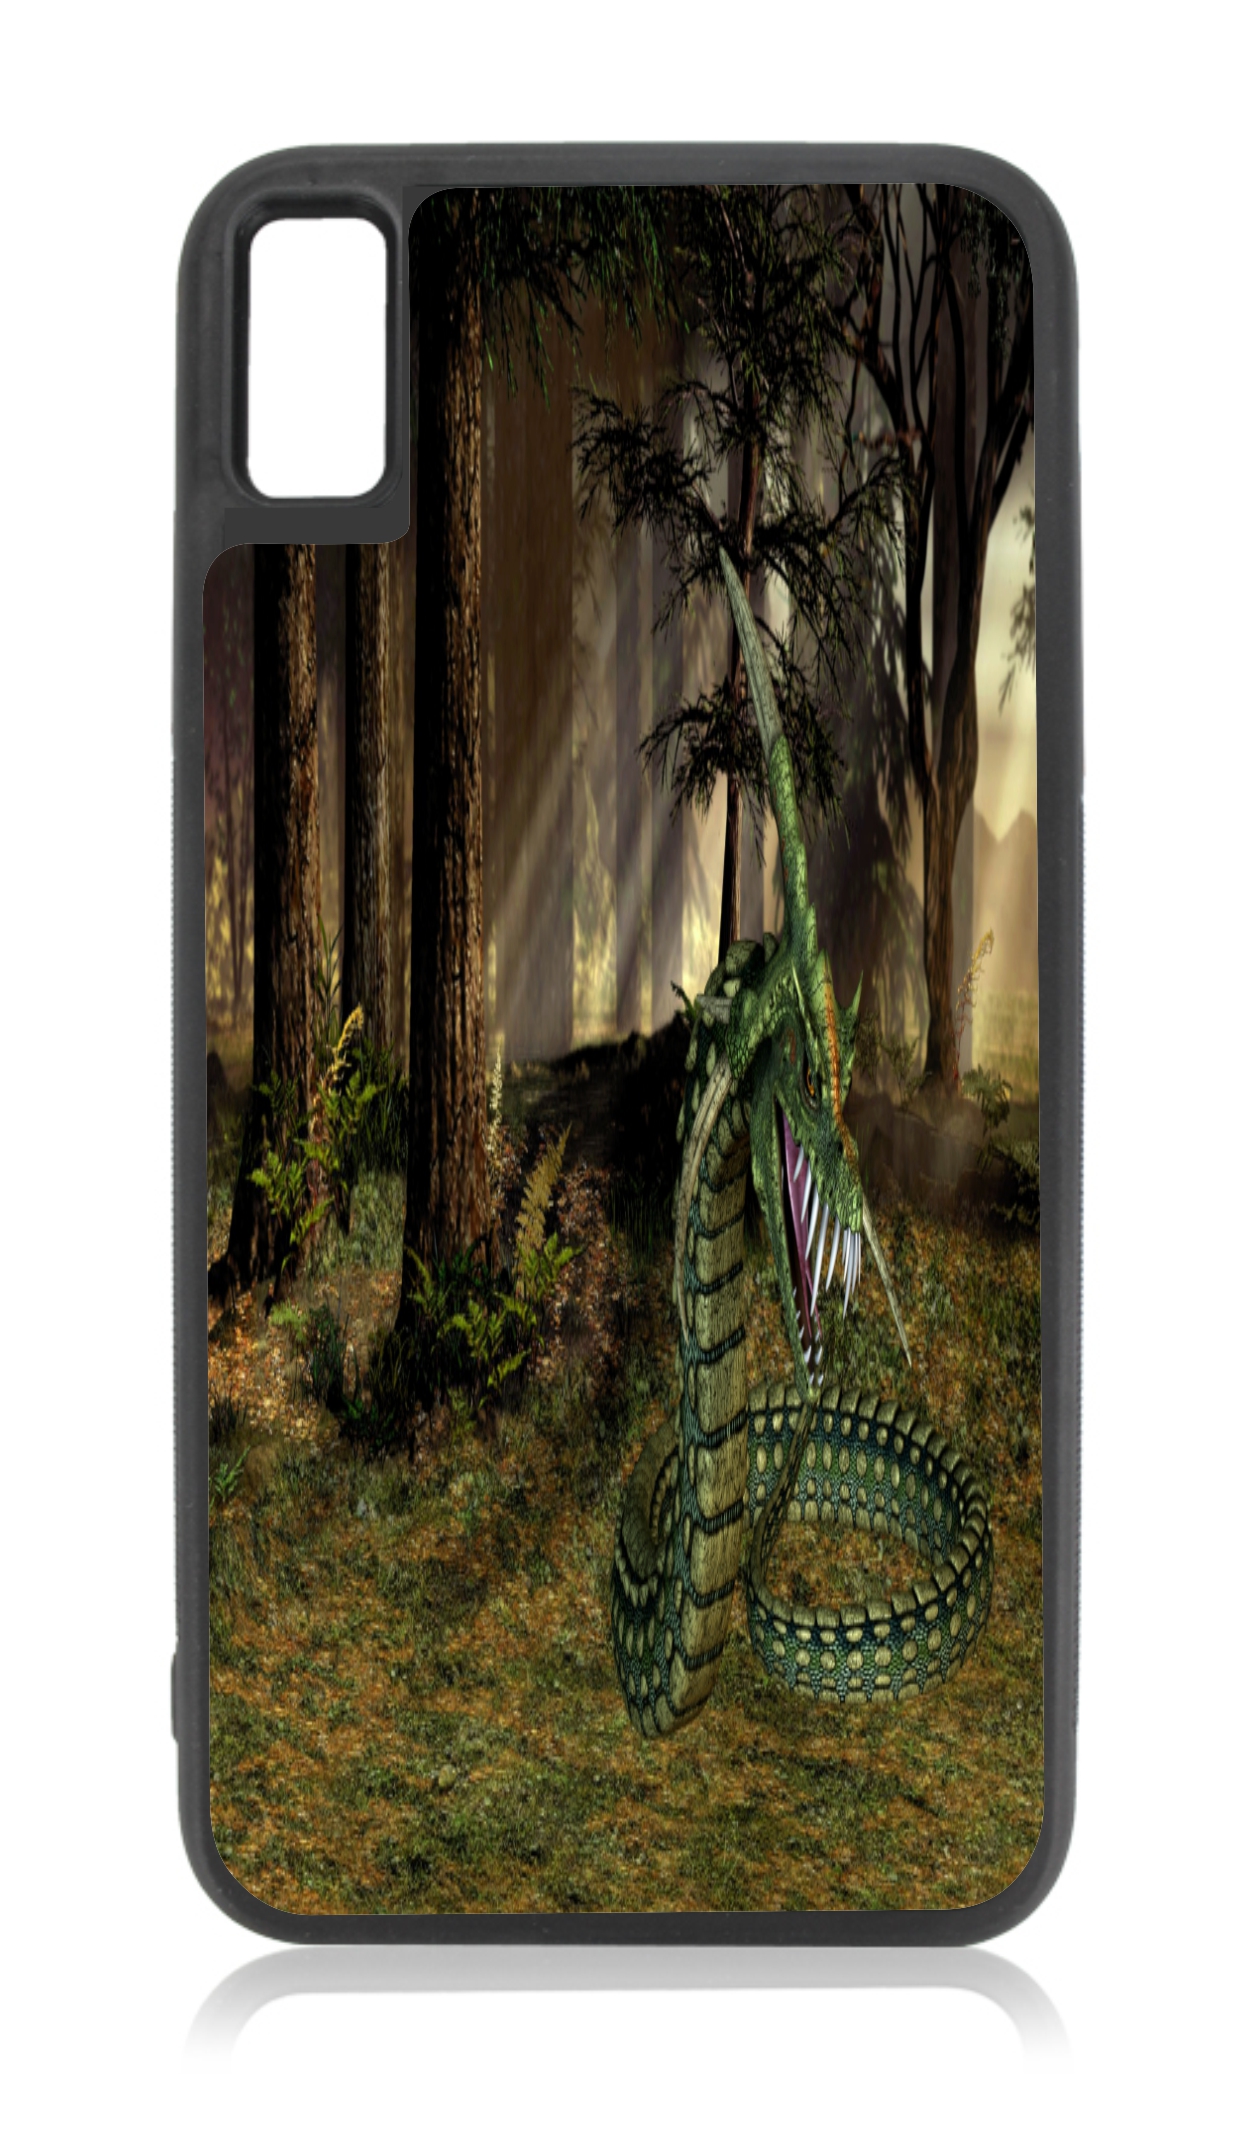 Lindworm Dragon in the Forest Design Black Rubber Case Cover for the Apple iPhone 10 / iPhone X / iPhone XS - iPhone 10 Case - iPhone X Case - iPhone XS Case - image 1 of 1